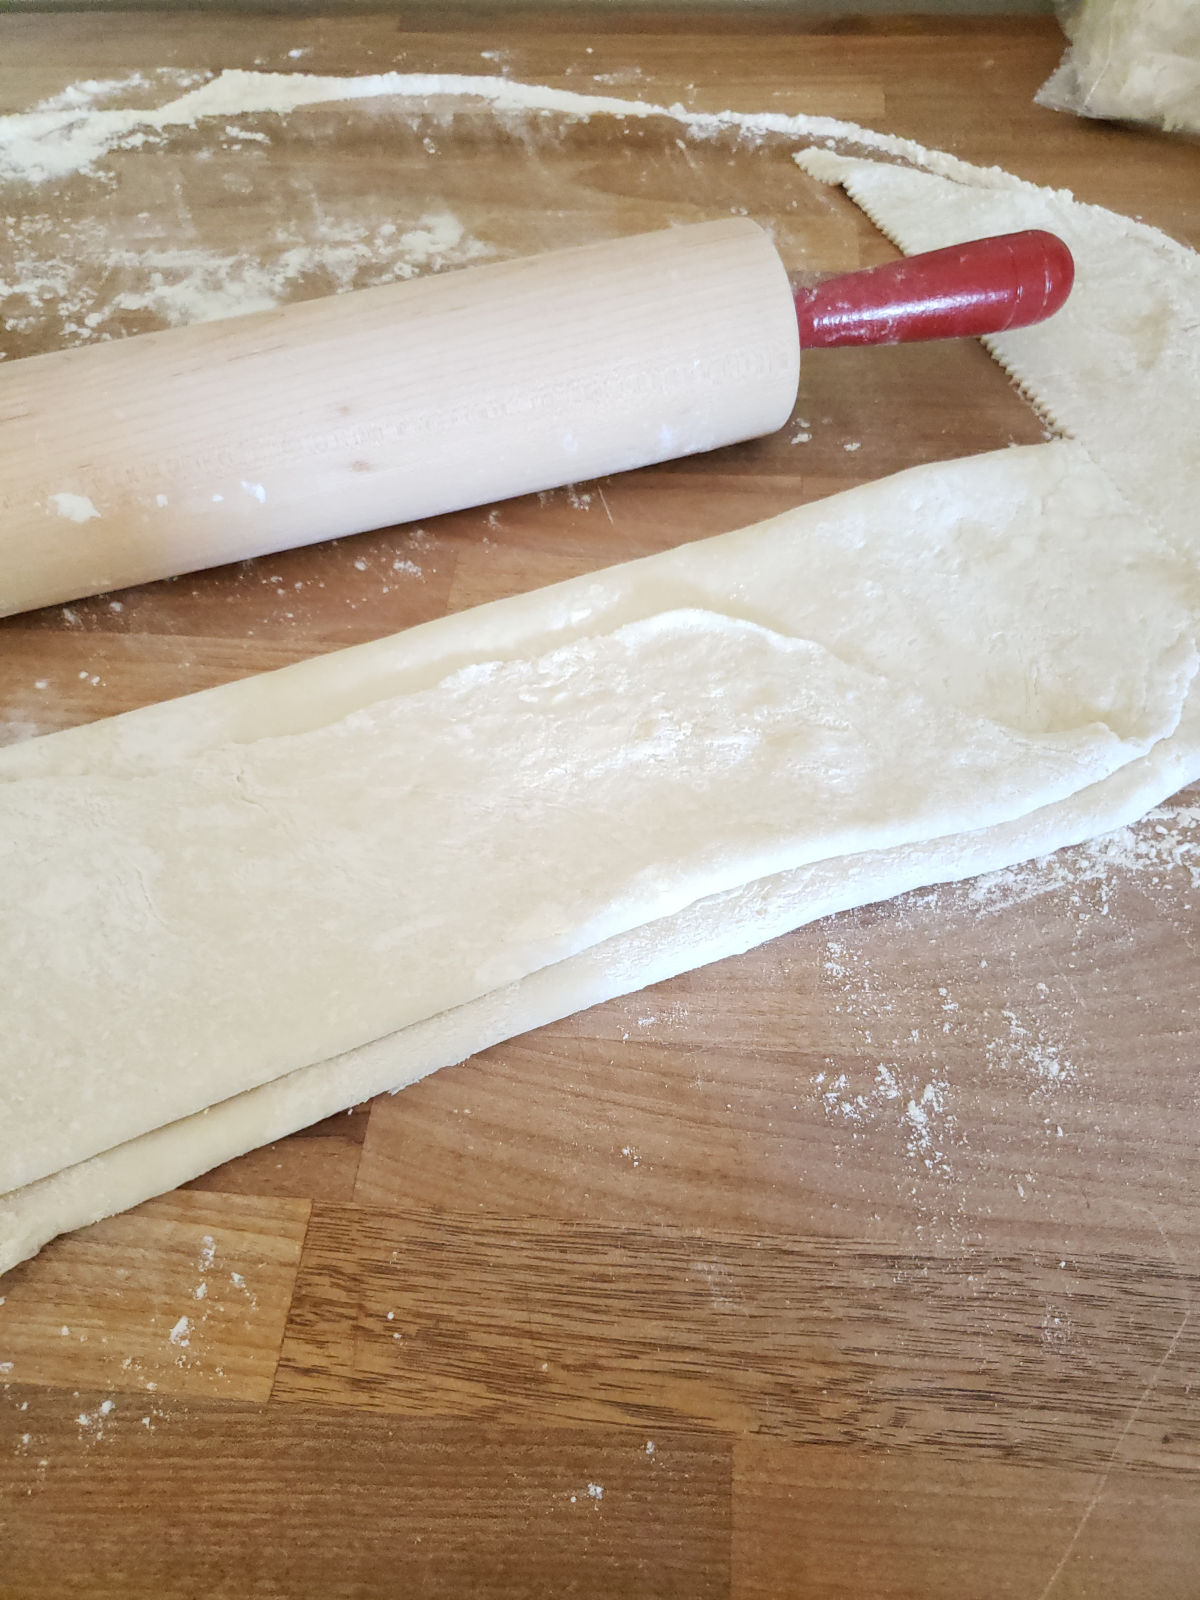 pie crust folded with wooden rolling pin red handles on butcher block.